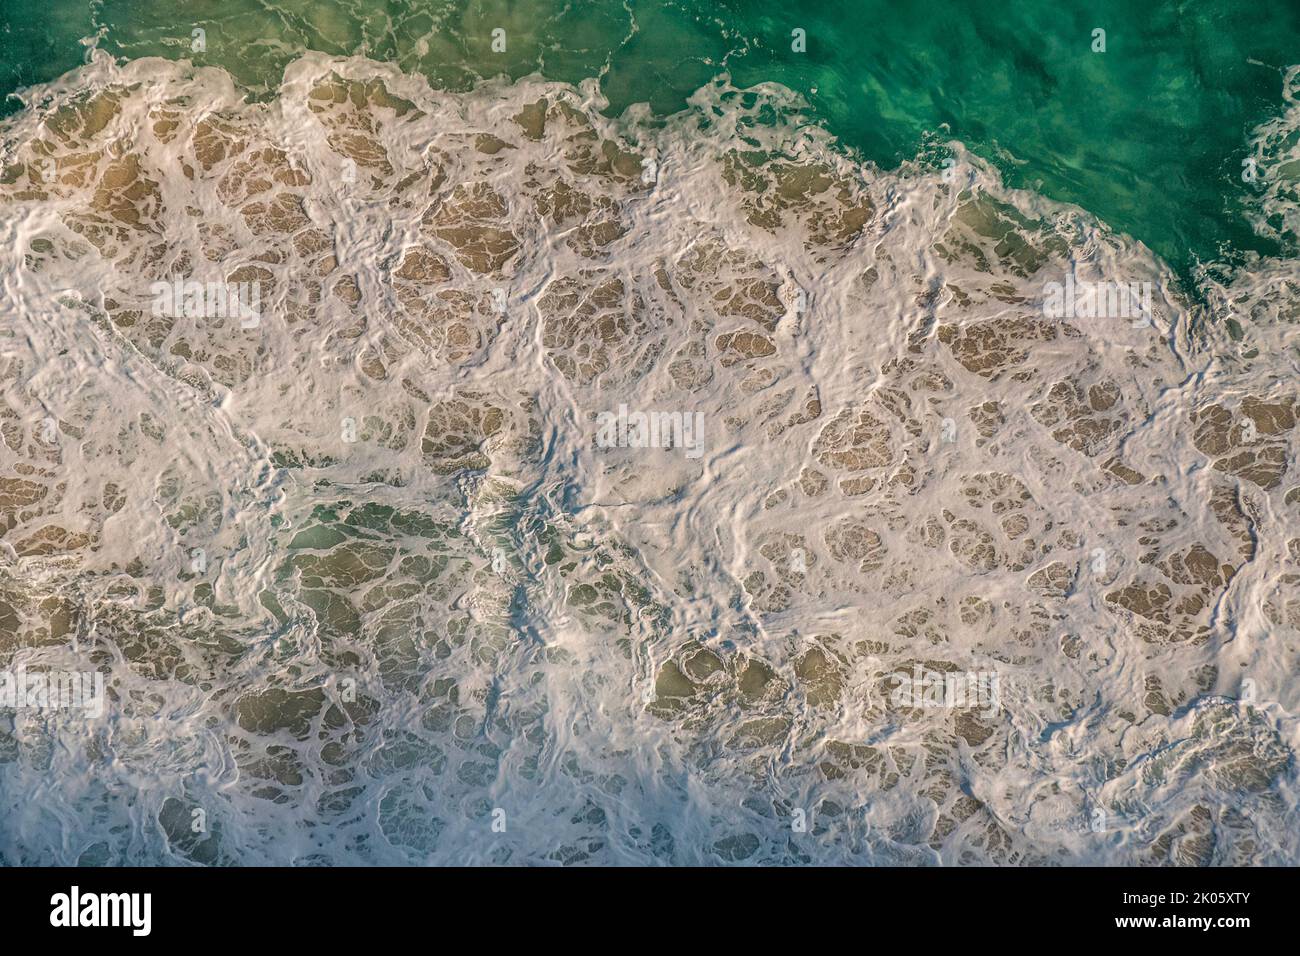 Top view of patterns of white foam from the impact of ocean waves on coastal rocks. South Africa Stock Photo